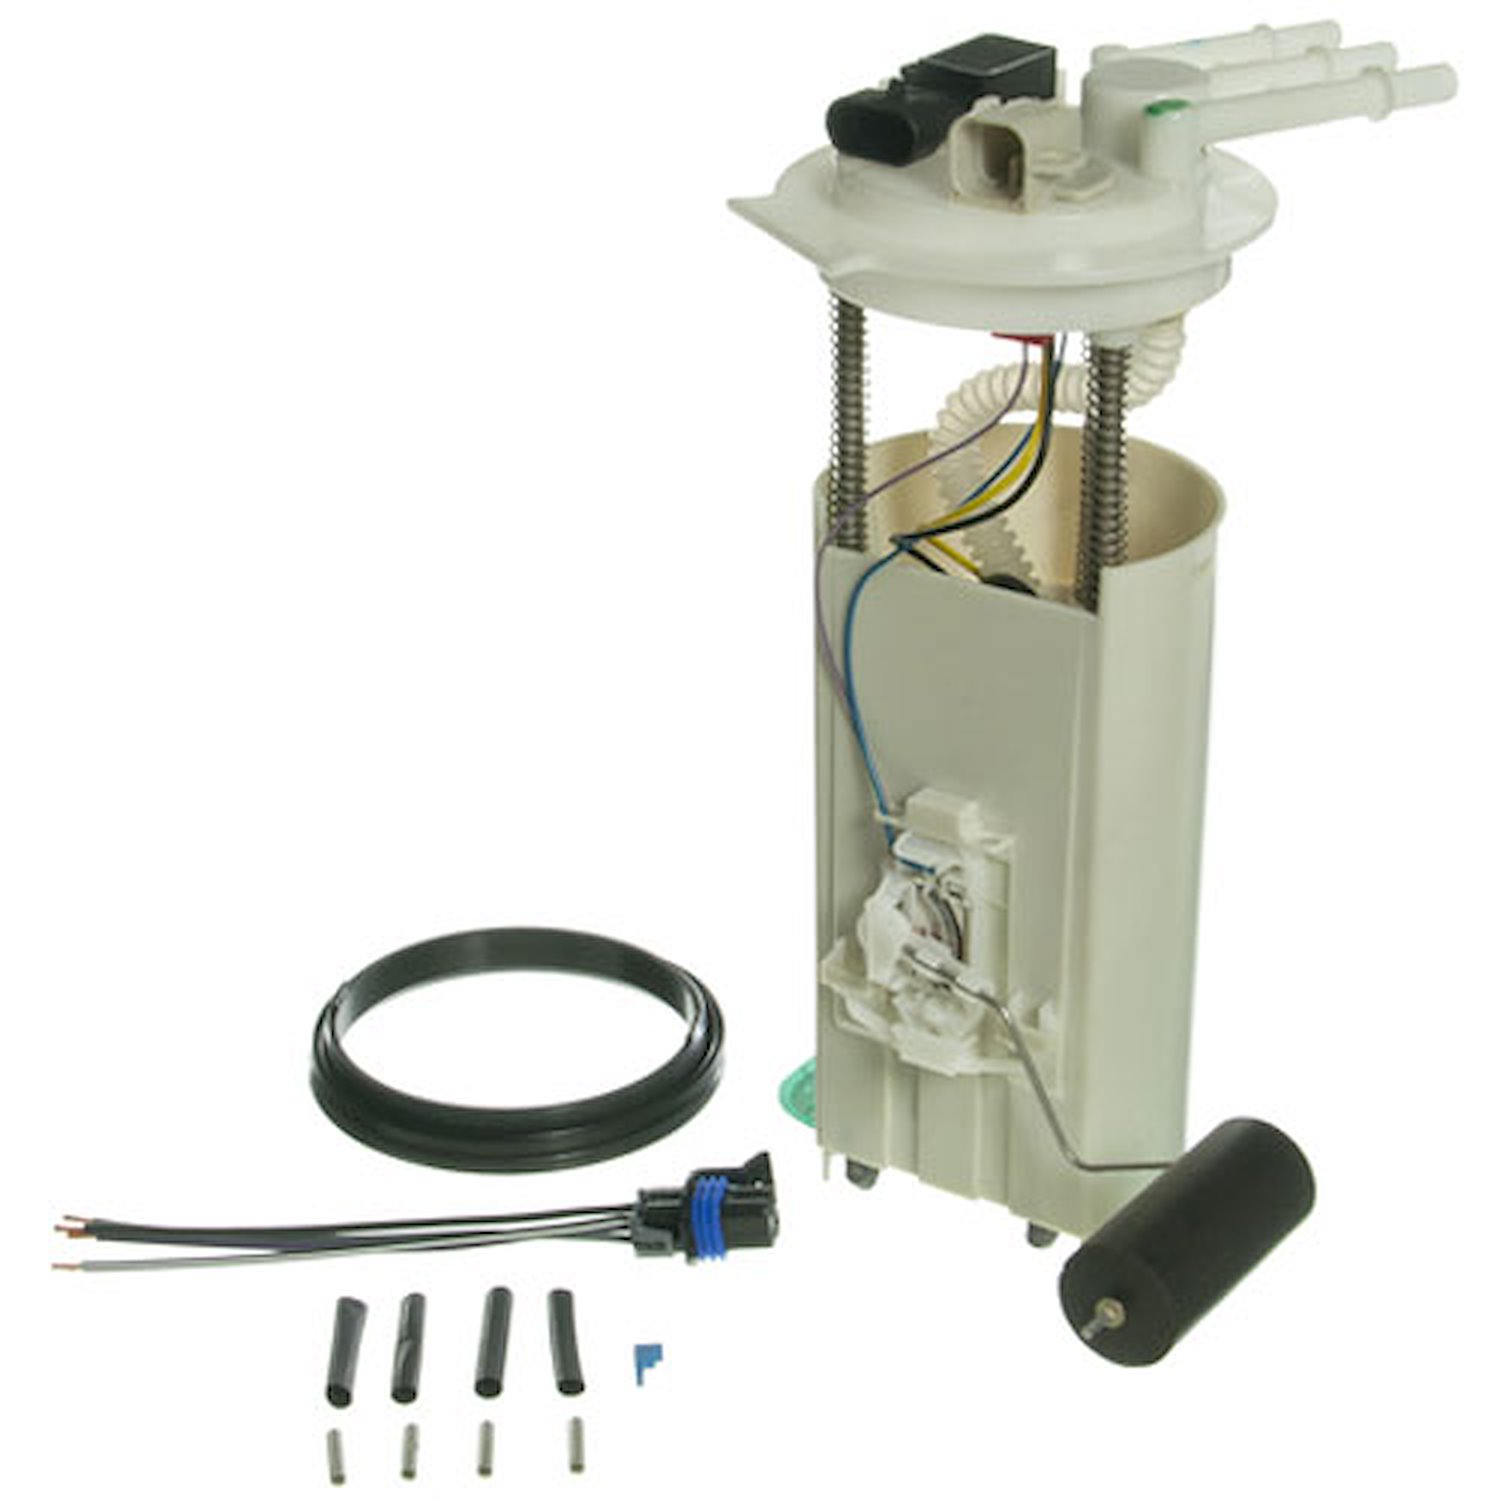 OE GM Replacement Electric Fuel Pump Module Assembly 2002 Buick Rendezvous 3.4L V6